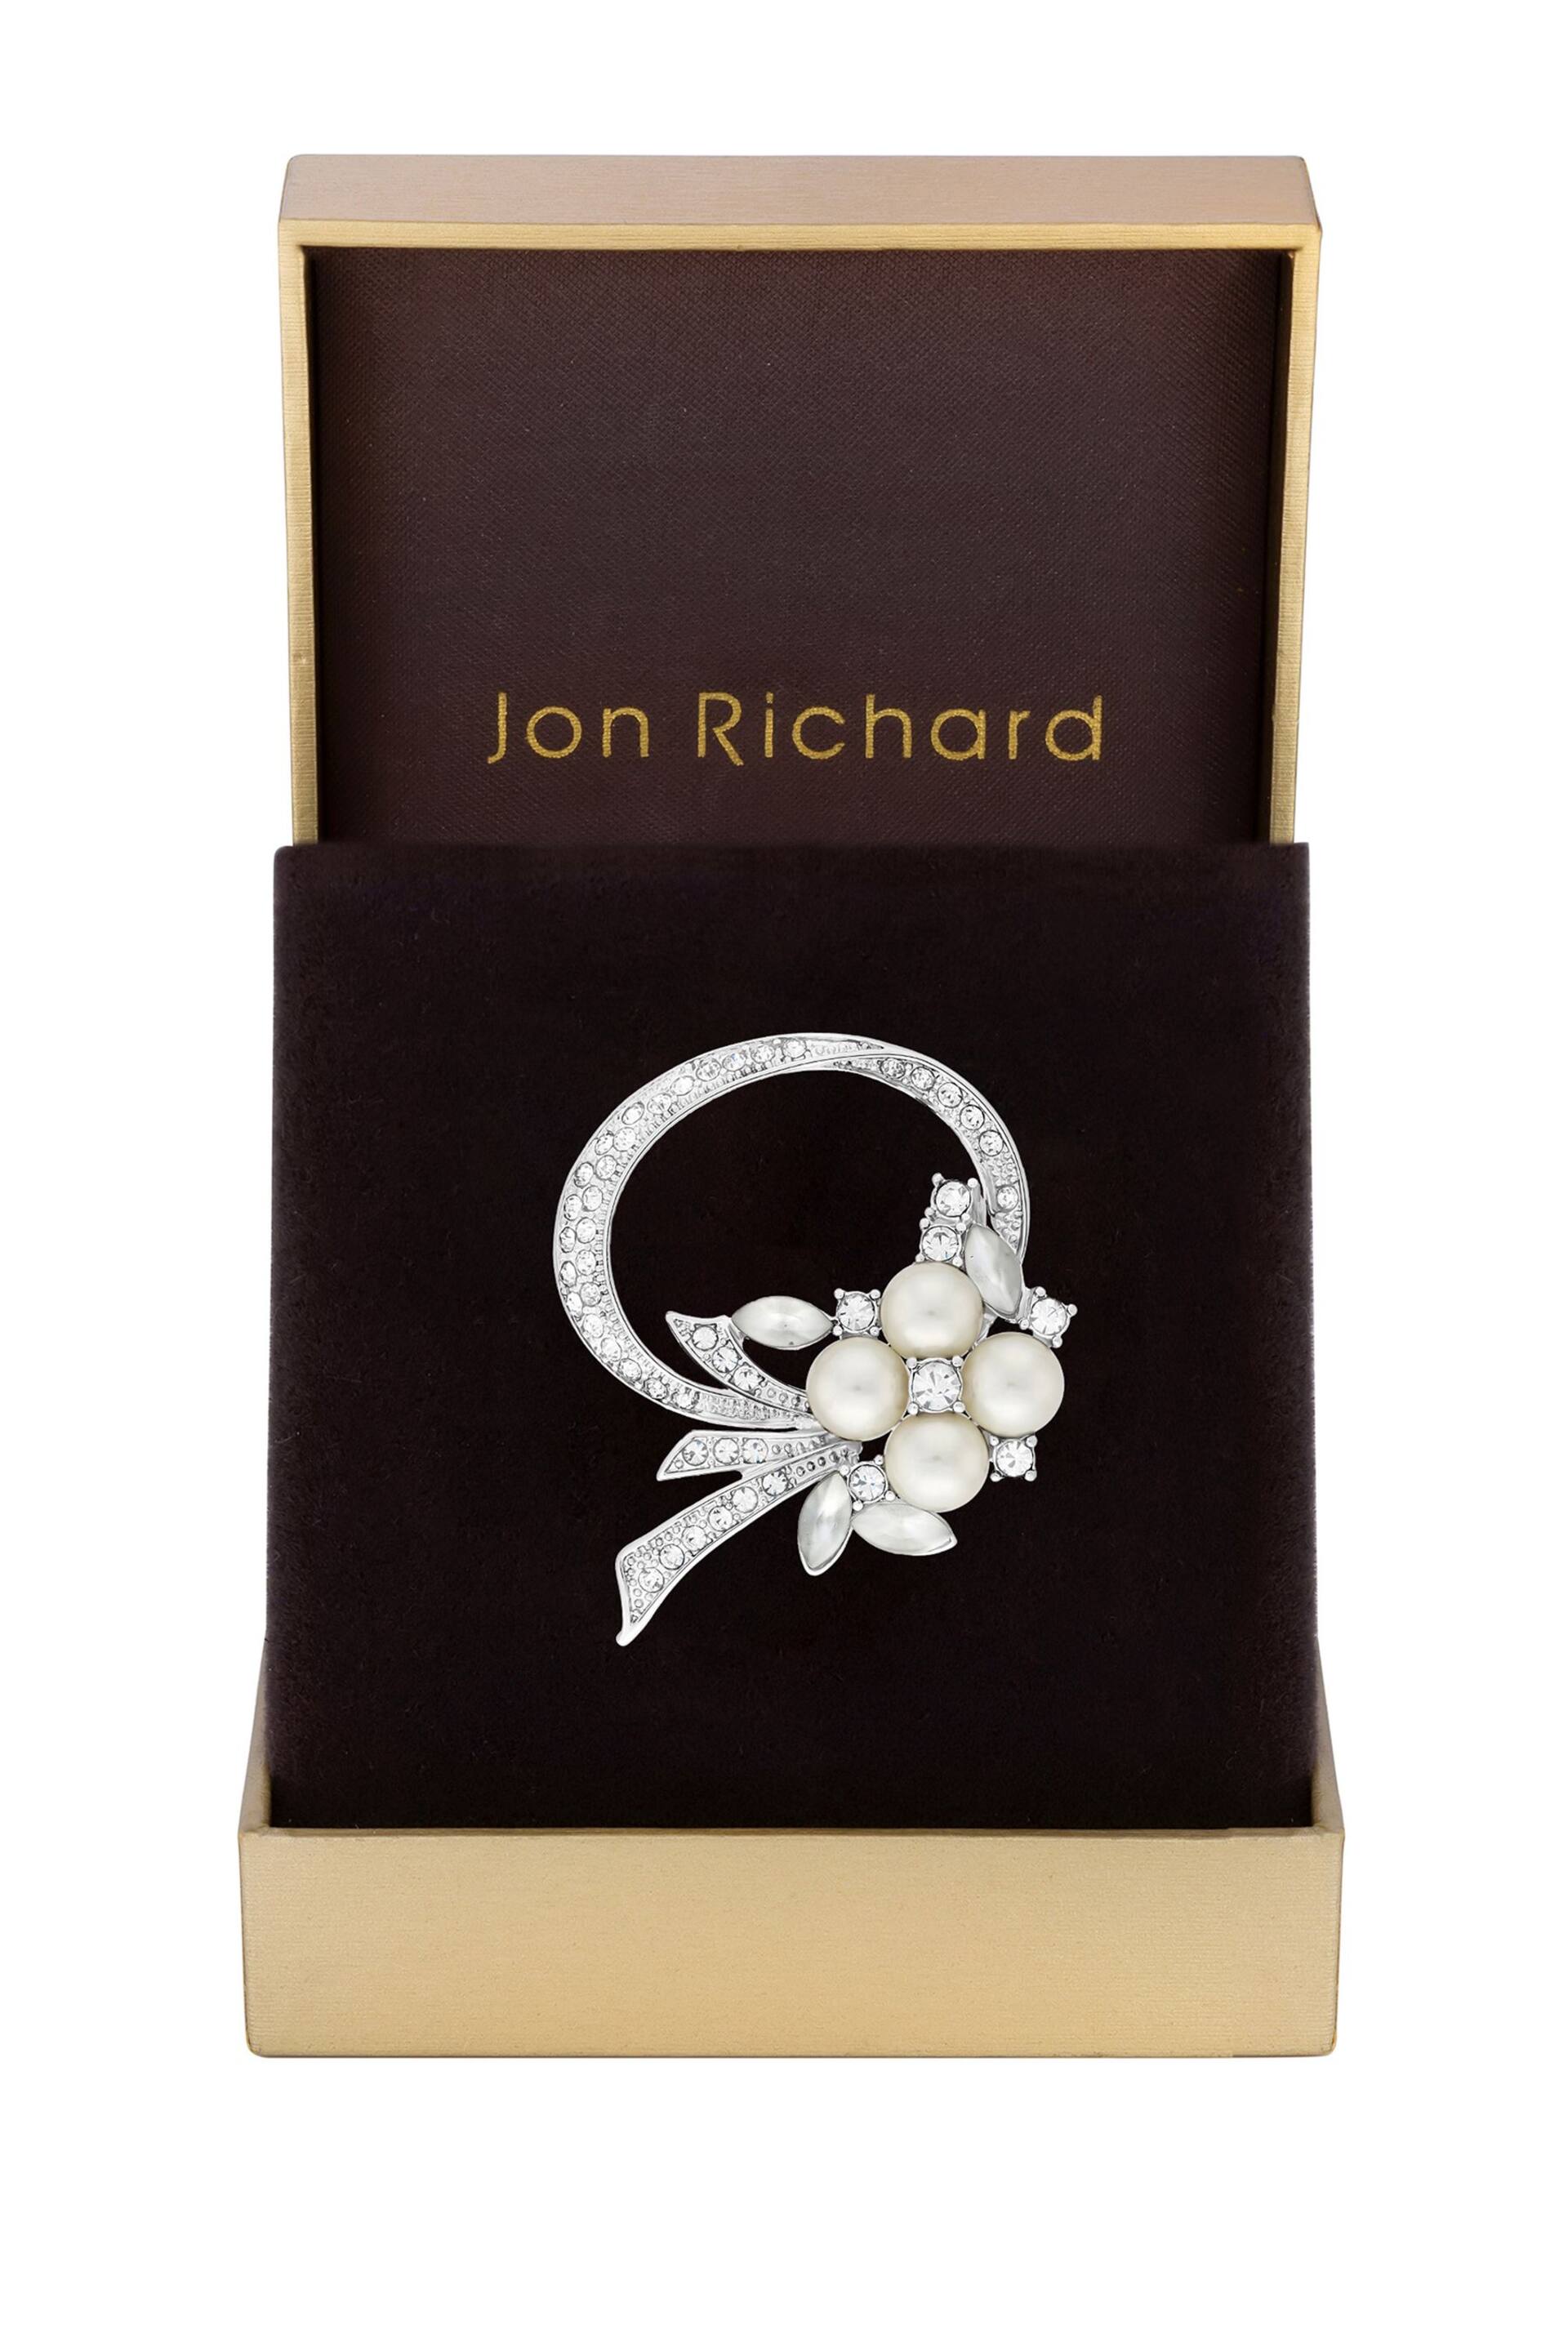 Jon Richard Silver Tone Open Bouquet Pearl And Crystal Brooch - Image 2 of 2